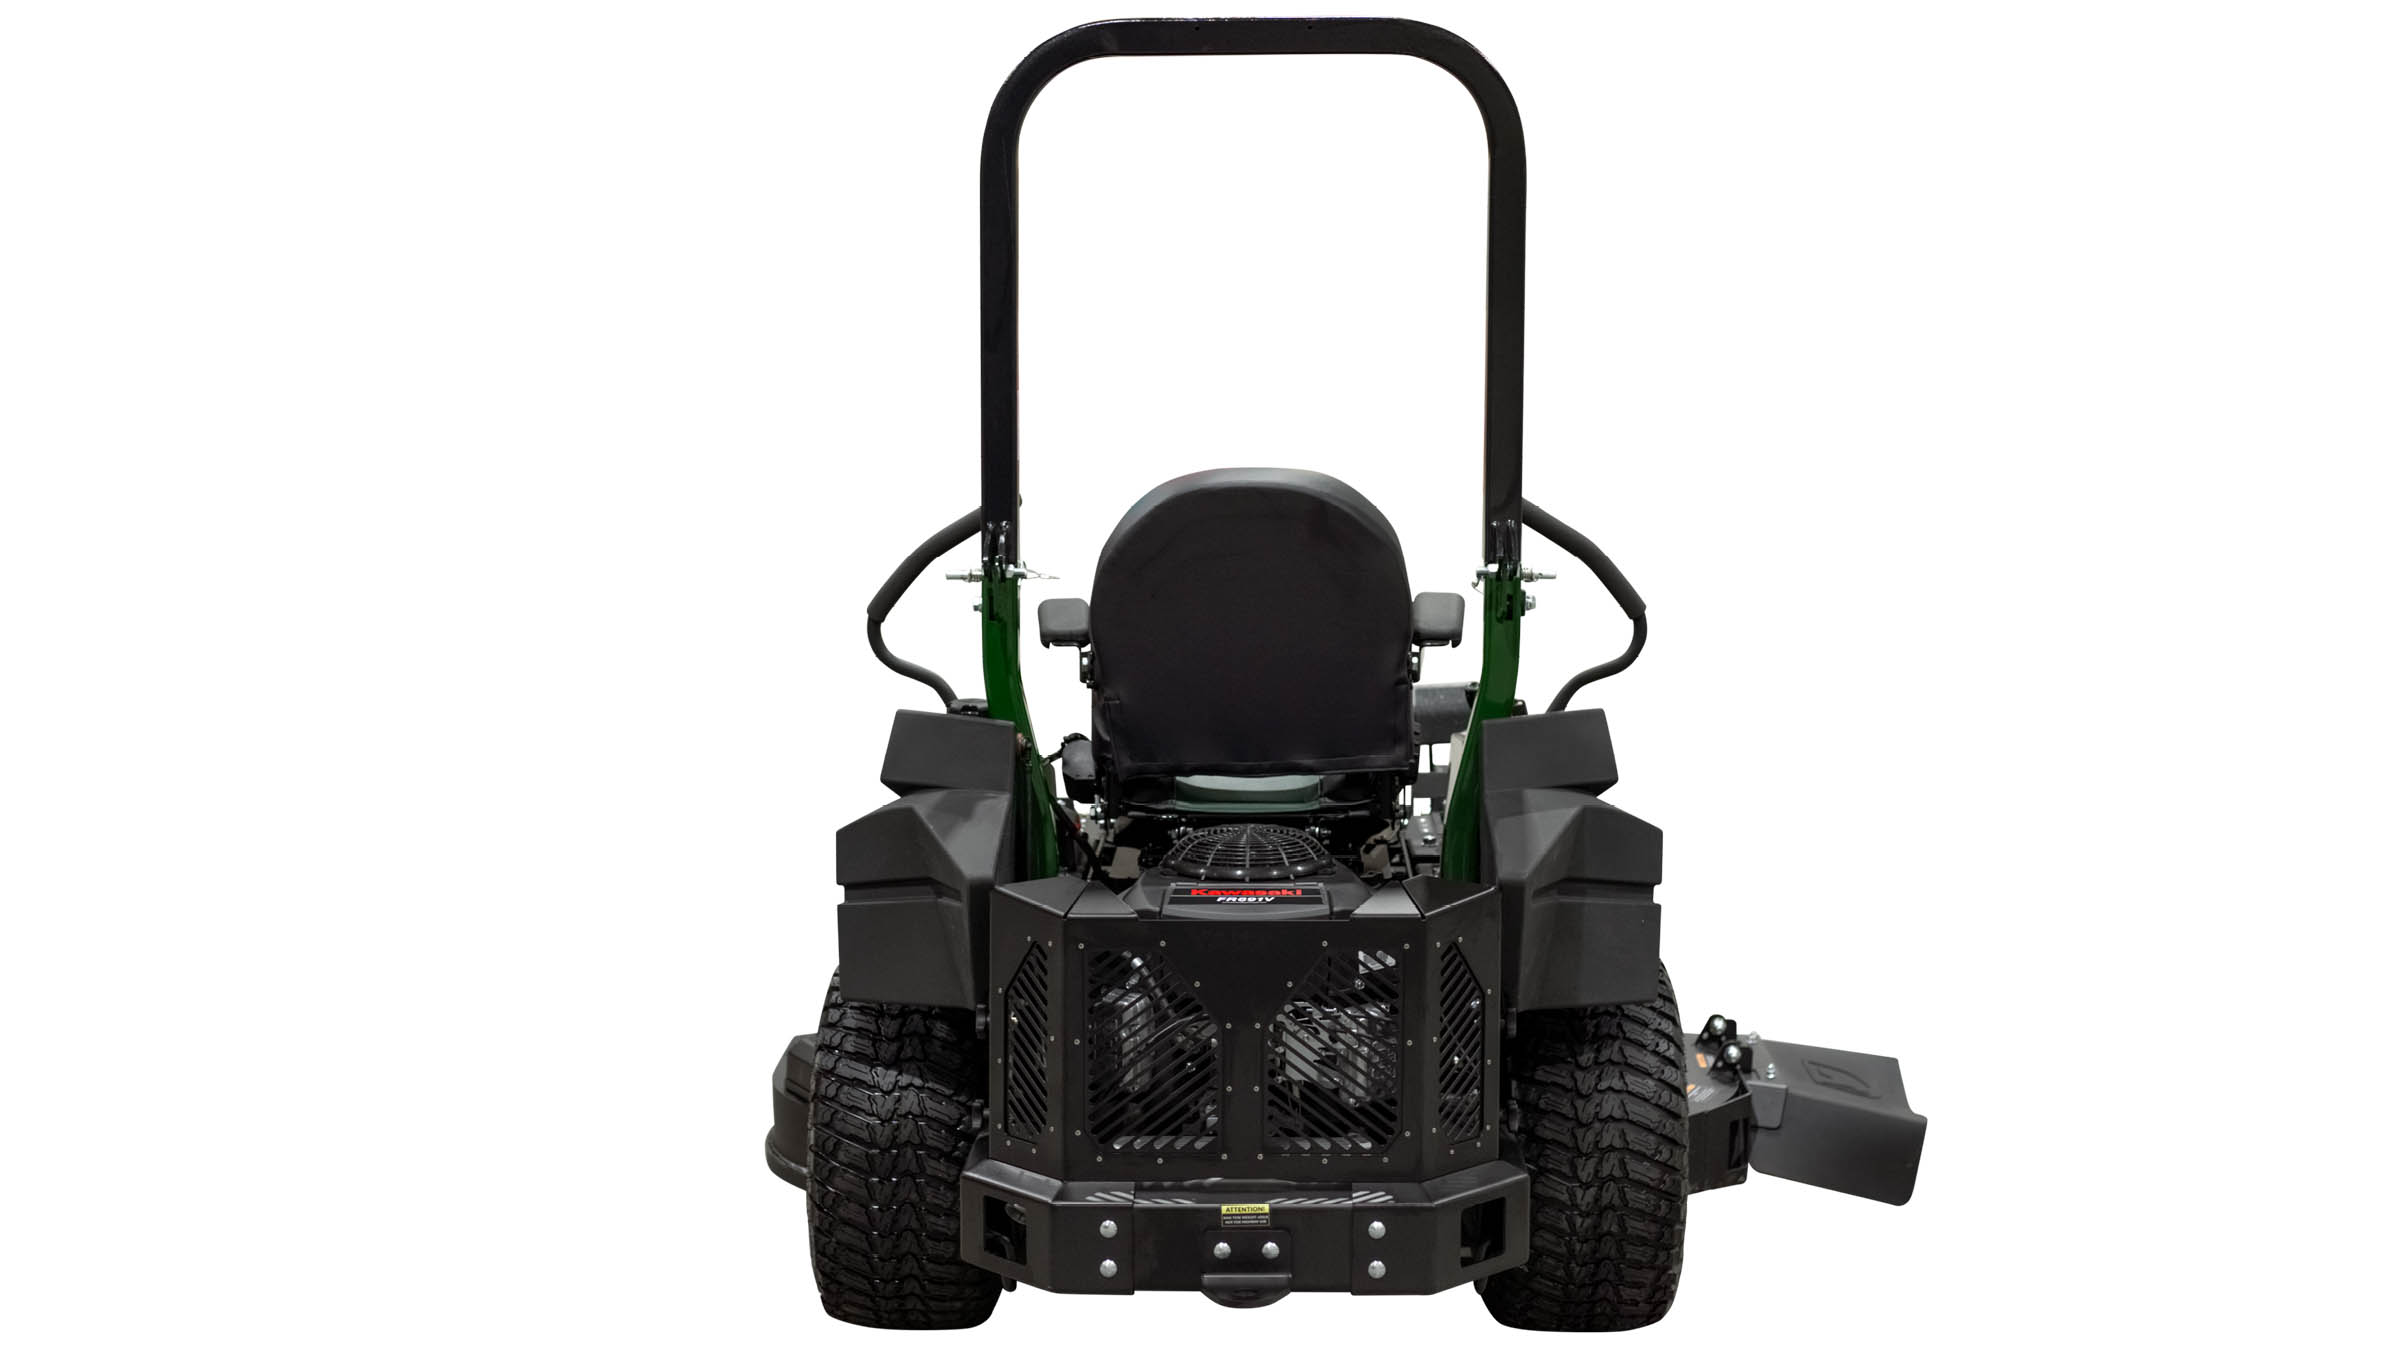 zero-turn riding lawn mower engine with guard and hitch plate